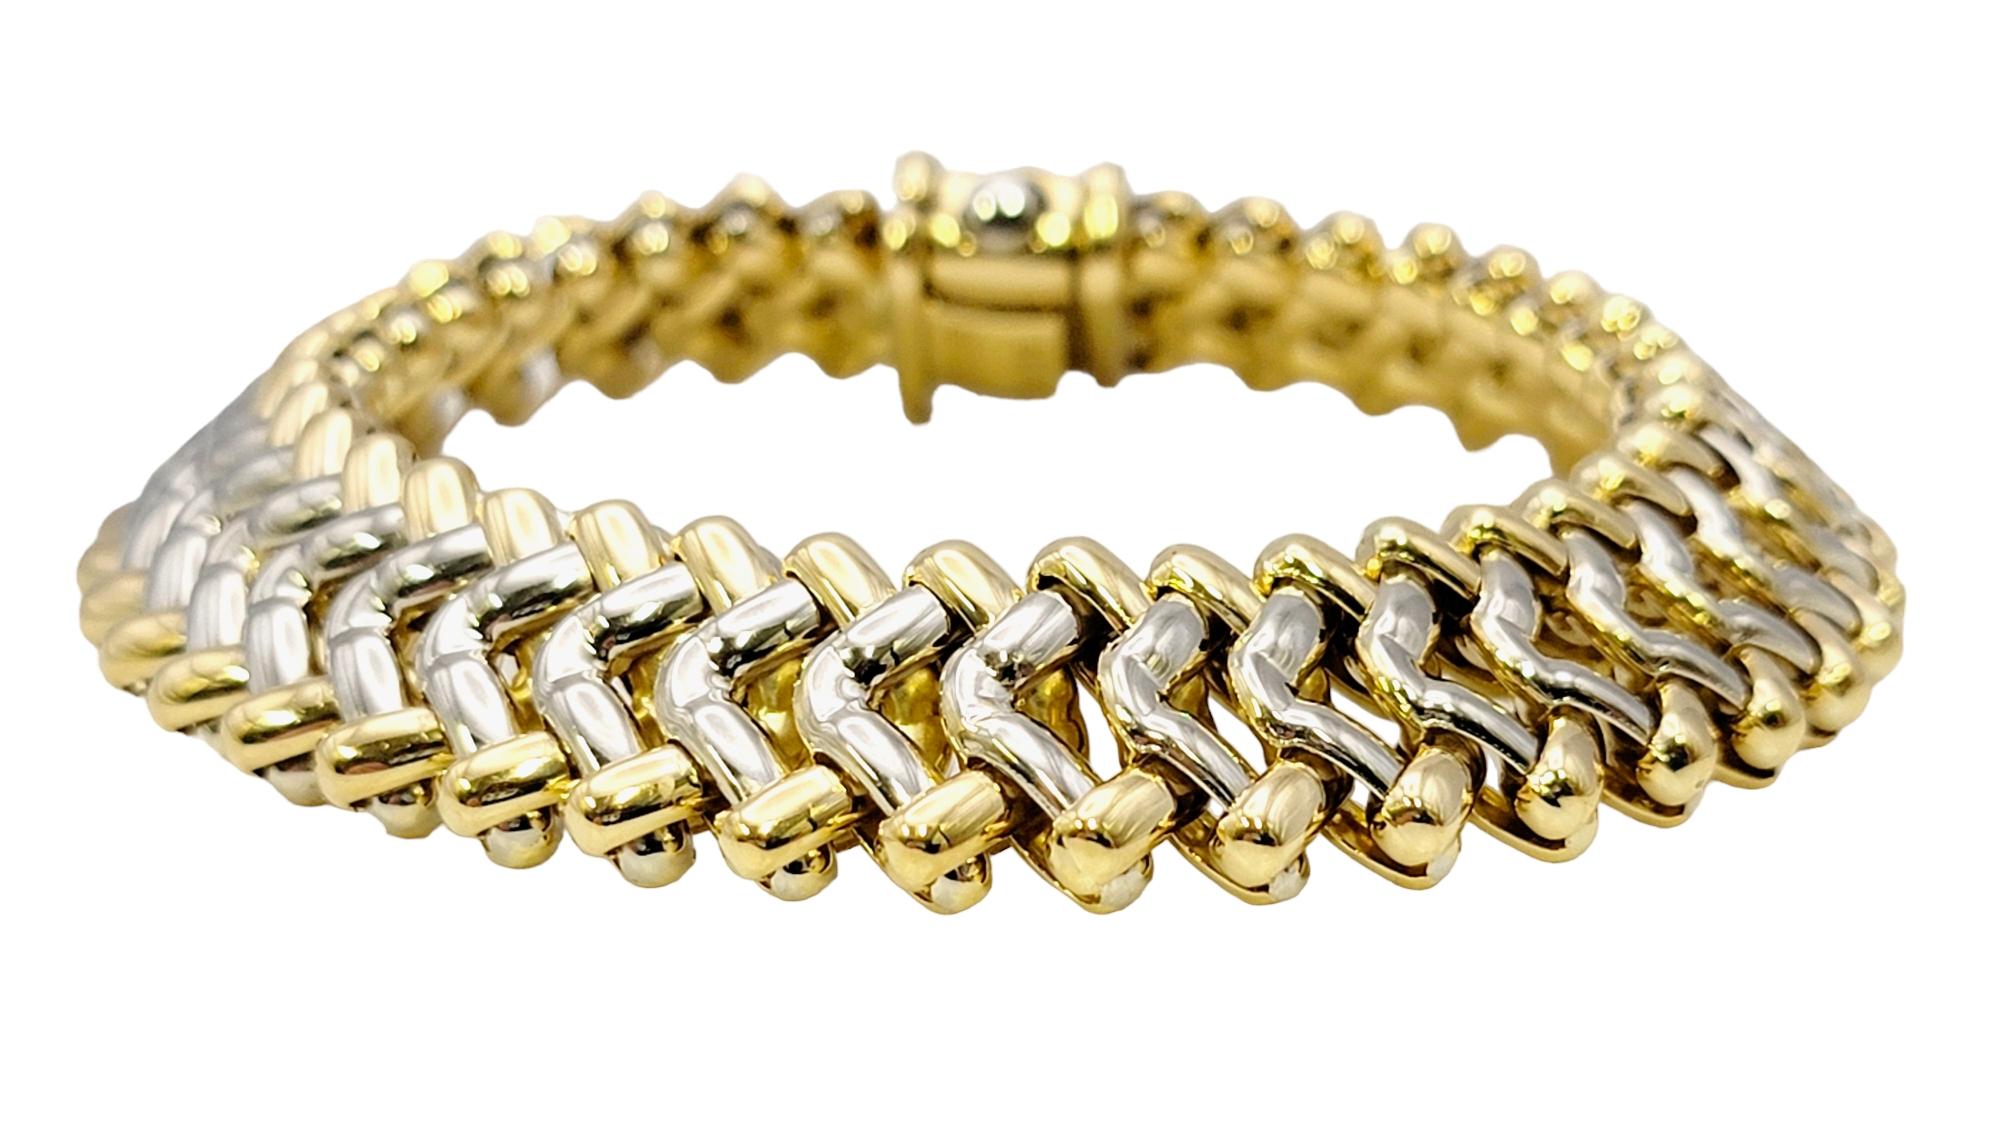 We absolutely love this chic bracelet by Italian jeweler, Chimento. Since 1964, the Chimento brand has been a leader in Italian goldsmith mastery. Their creations are exquisitely Italian in taste, designed for those who want their jewelry to not